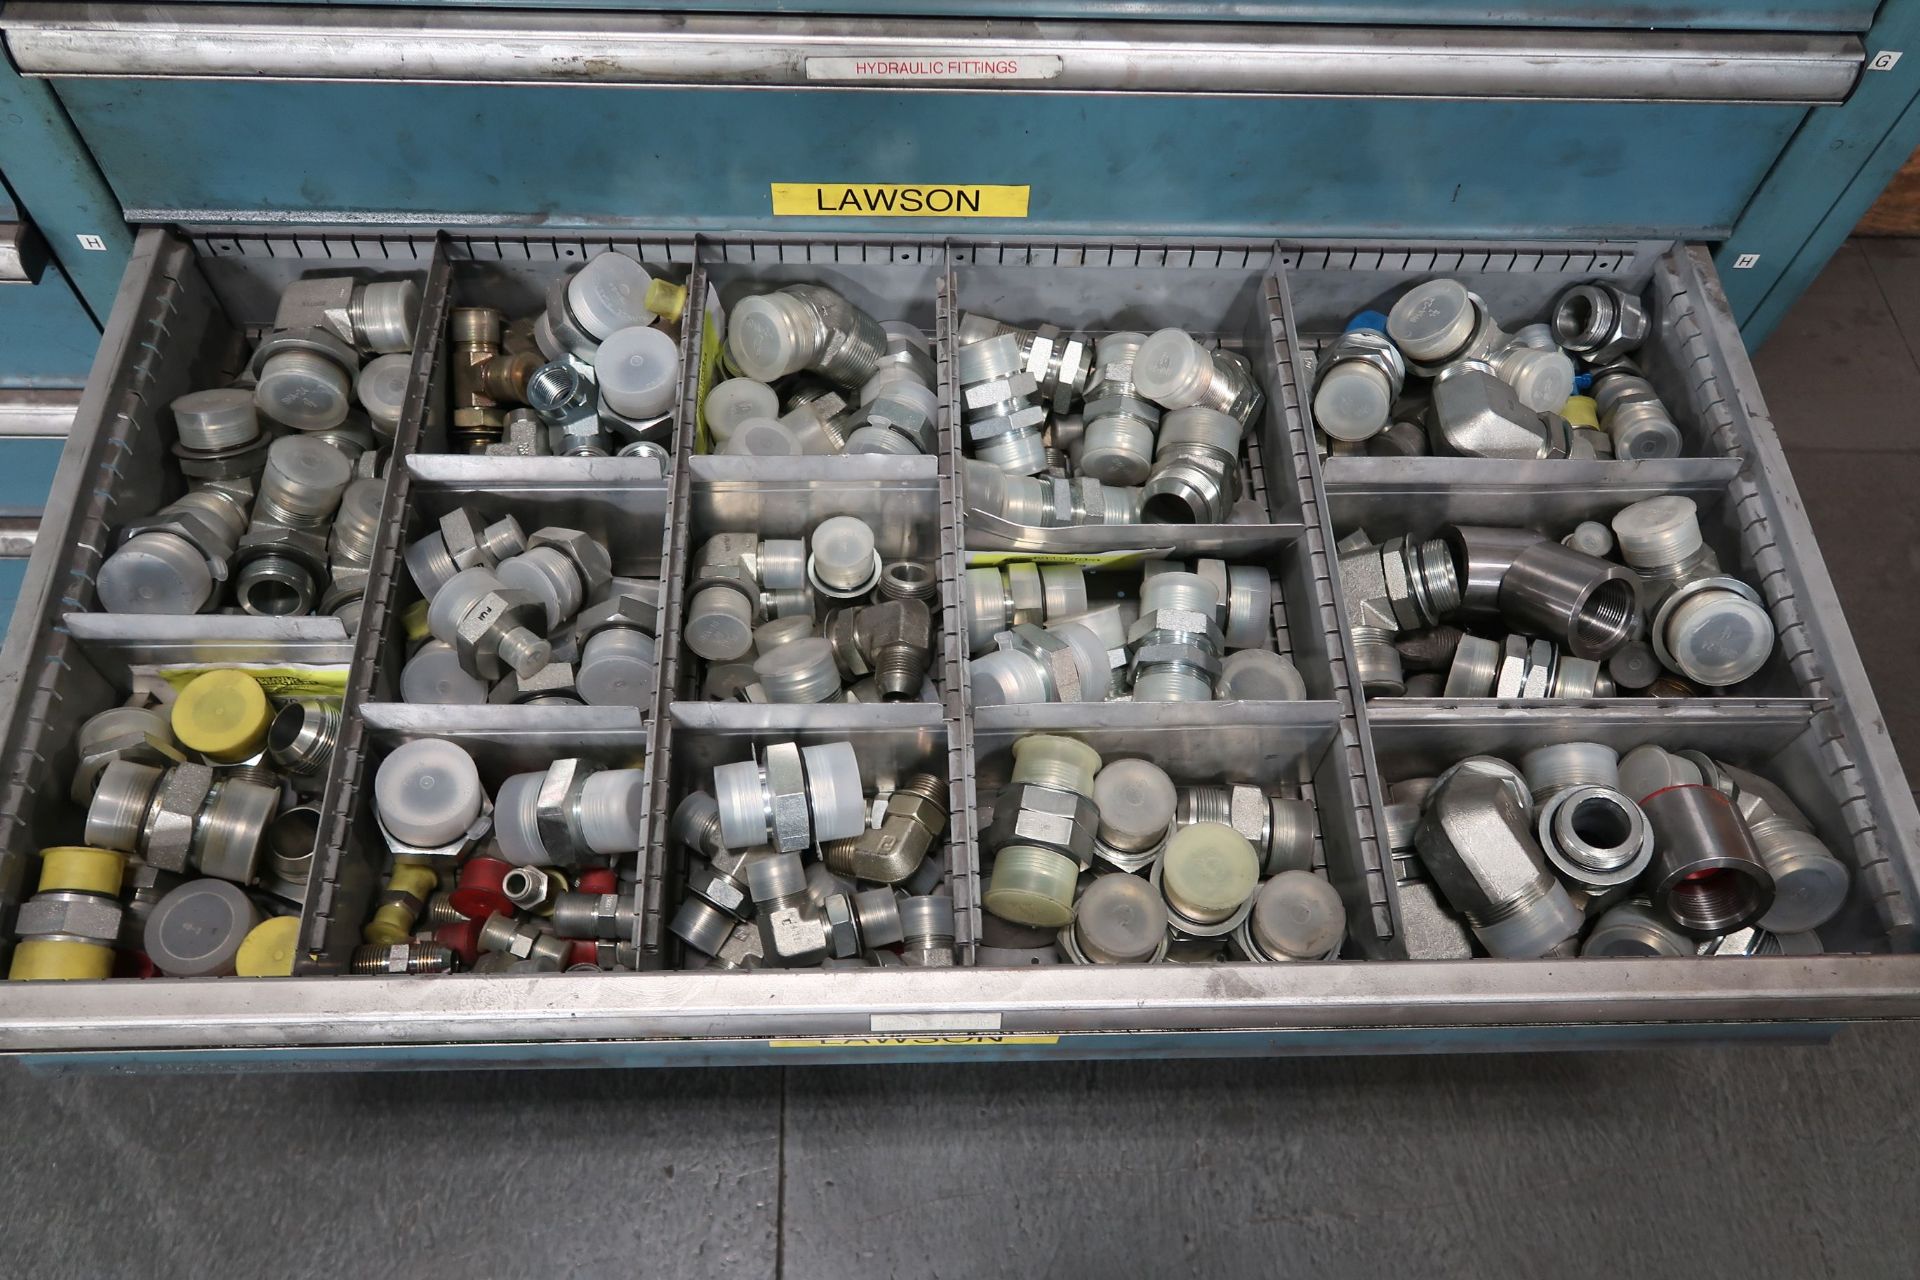 TOOLING CABINETS WITH CONTENTS - MOSTLY MACHINE PARTS **LOADING PRICE DUE TO ERRA - $2,000.00** - Image 6 of 59